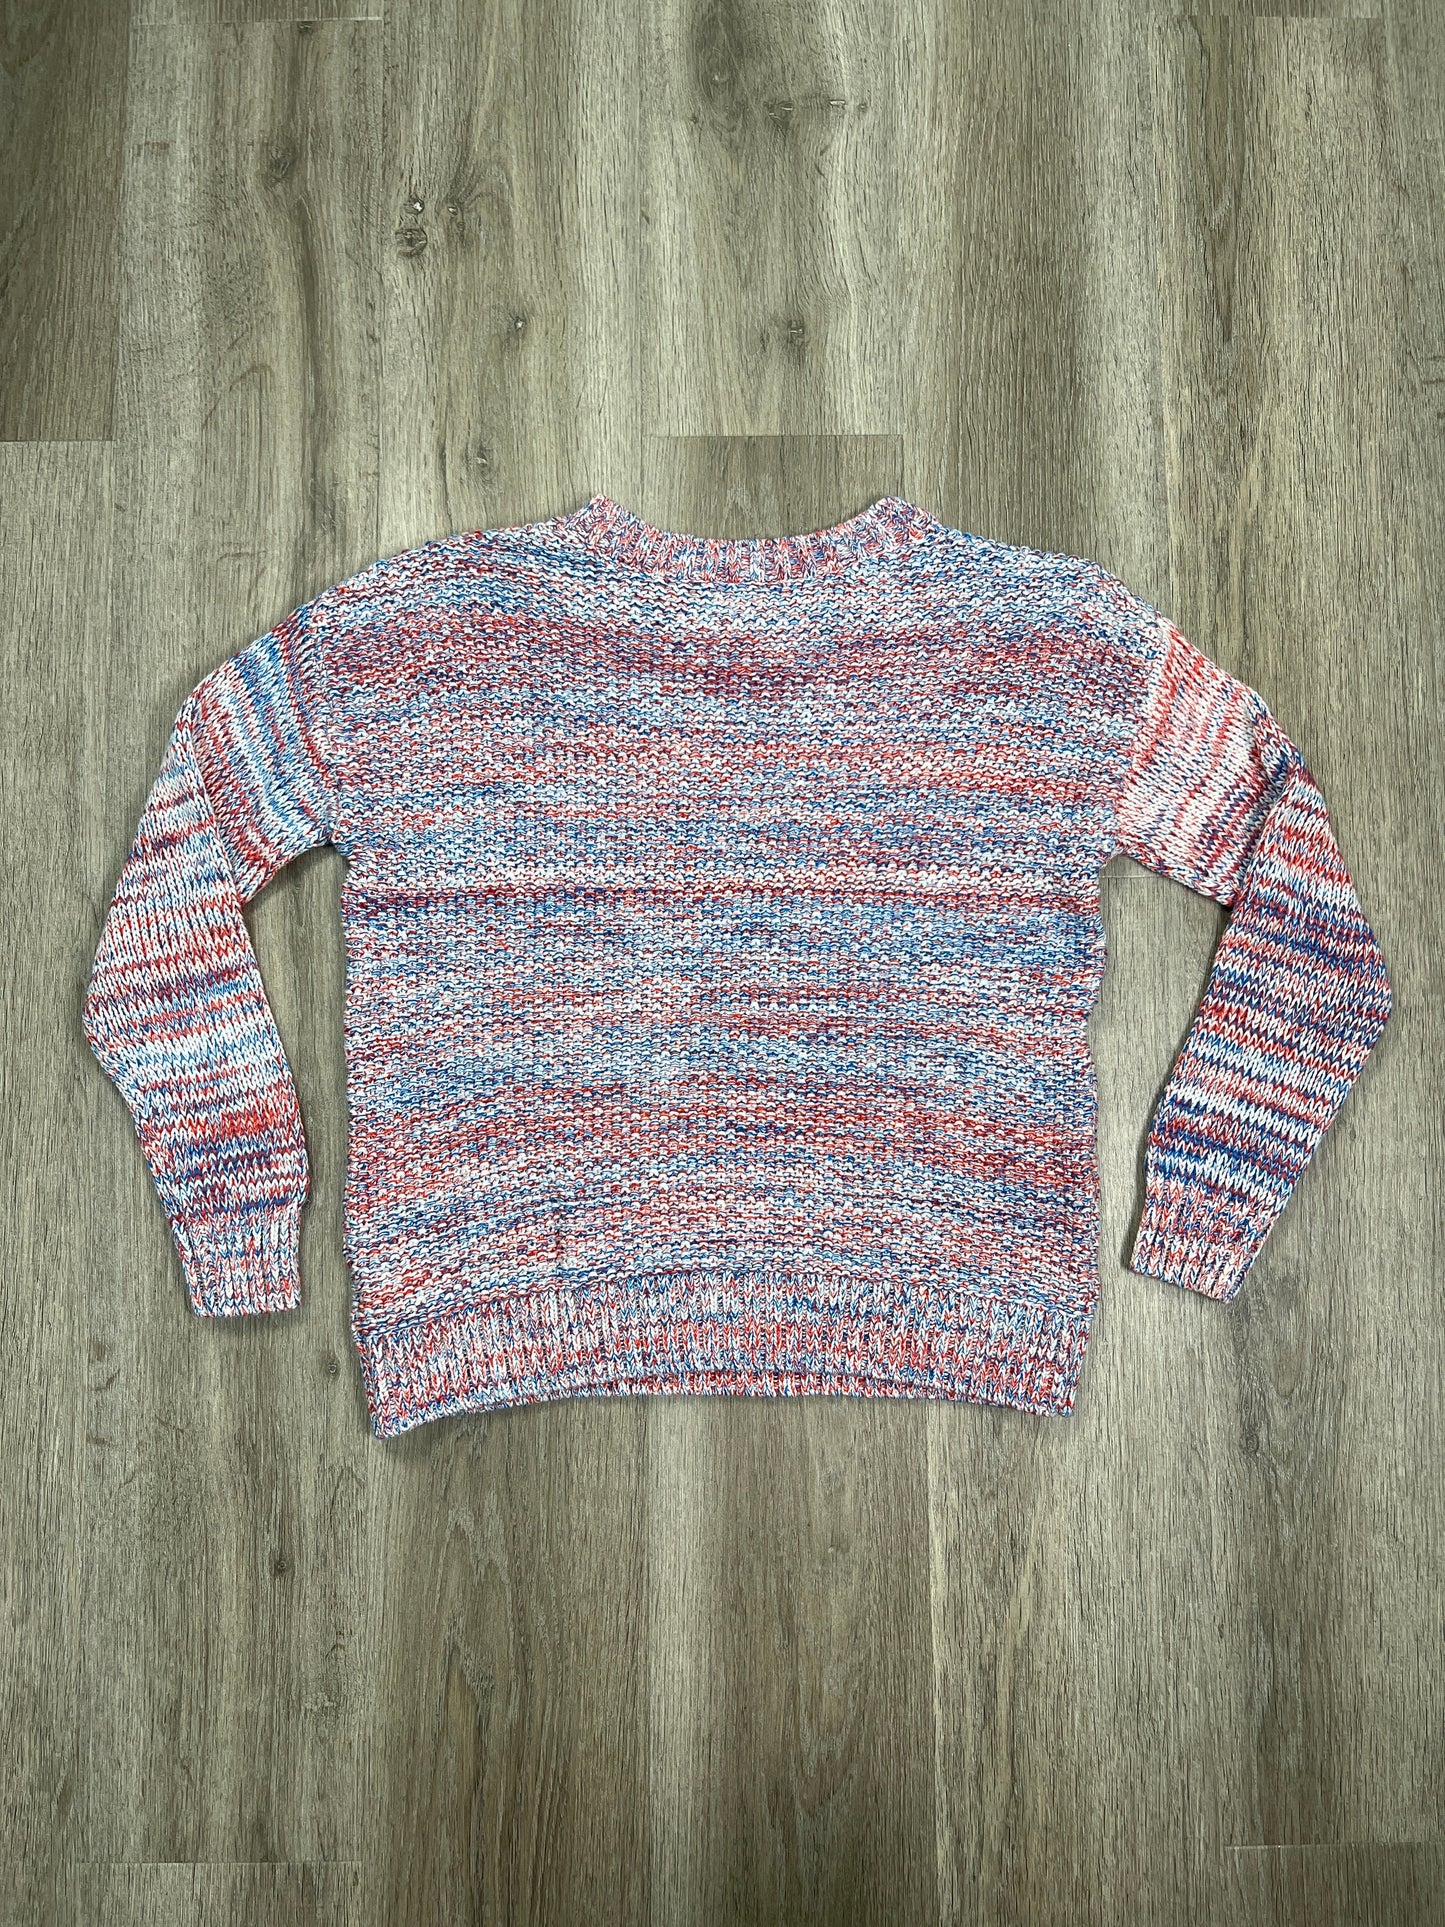 Blue Red & White Sweater Gap, Size M